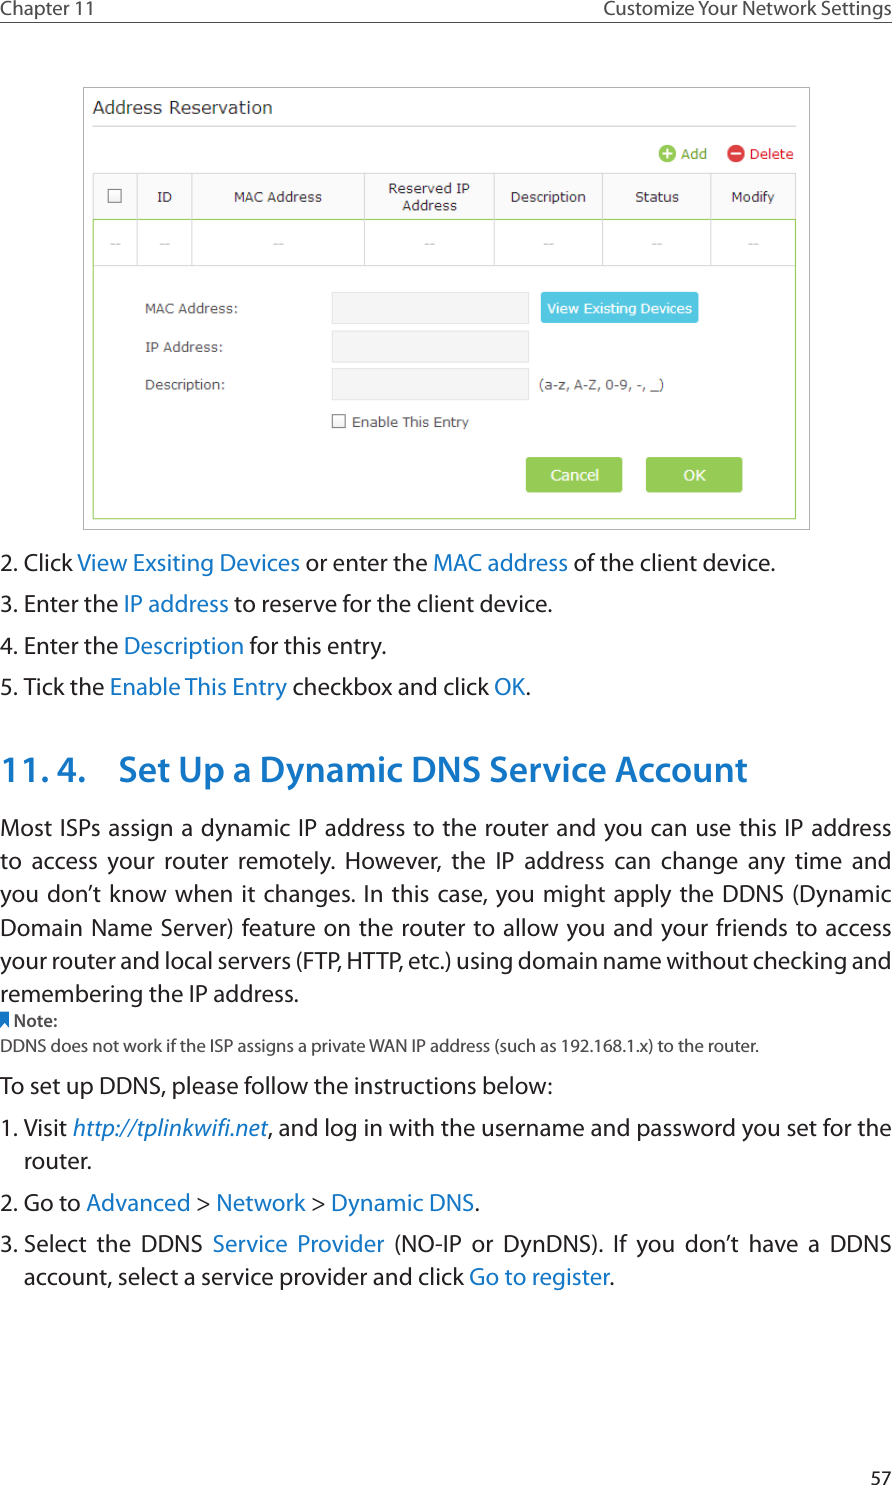 57Chapter 11 Customize Your Network Settings2. Click View Exsiting Devices or enter the MAC address of the client device.3. Enter the IP address to reserve for the client device.4. Enter the Description for this entry.5. Tick the Enable This Entry checkbox and click OK. 11. 4.  Set Up a Dynamic DNS Service AccountMost ISPs assign a dynamic IP address to the router and you can use this IP address to access your router remotely. However, the IP address can change any time and you don’t know when it changes. In this case, you might apply the DDNS (Dynamic Domain Name Server) feature on the router to allow you and your friends to access your router and local servers (FTP, HTTP, etc.) using domain name without checking and remembering the IP address. Note: DDNS does not work if the ISP assigns a private WAN IP address (such as 192.168.1.x) to the router. To set up DDNS, please follow the instructions below:1. Visit http://tplinkwifi.net, and log in with the username and password you set for the router.2. Go to Advanced &gt; Network &gt; Dynamic DNS.3. Select the DDNS Service Provider (NO-IP or DynDNS). If you don’t have a DDNS account, select a service provider and click Go to register.